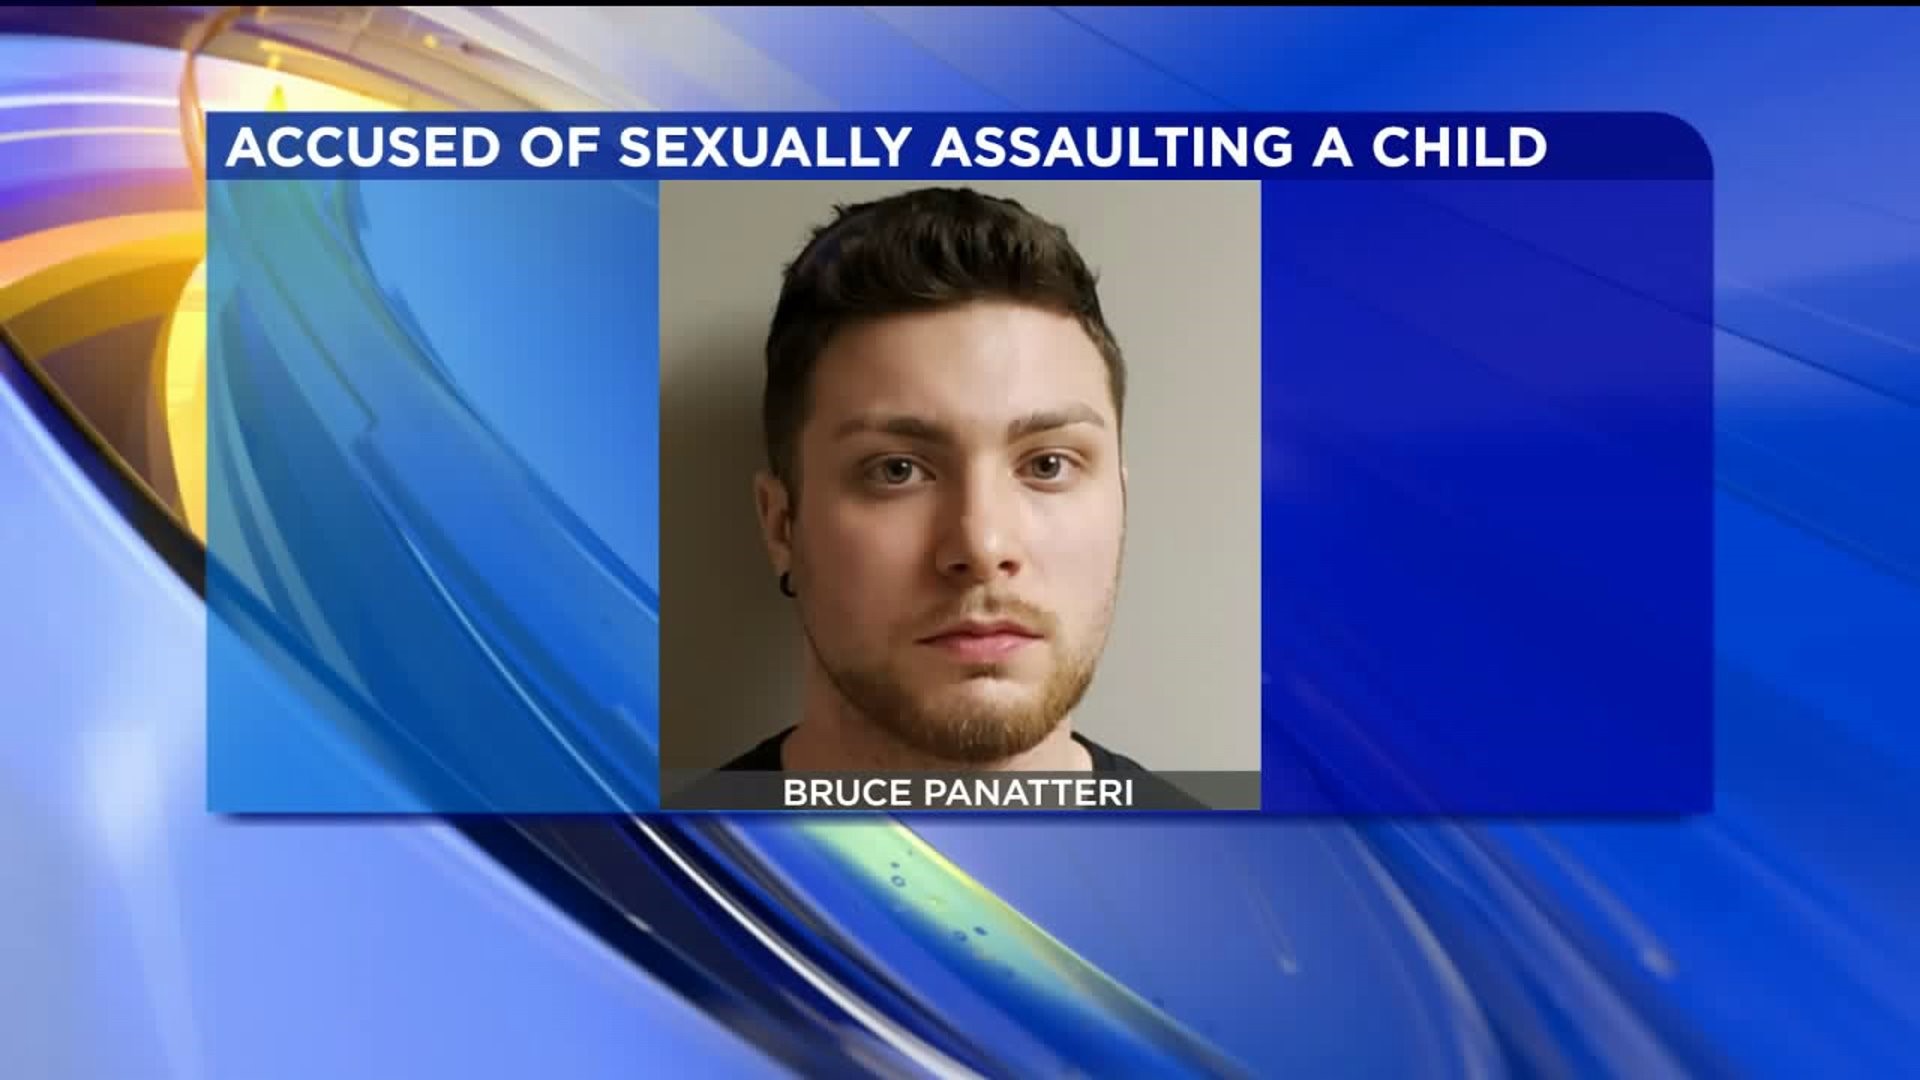 Man Accused of Sexually Assaulting Child